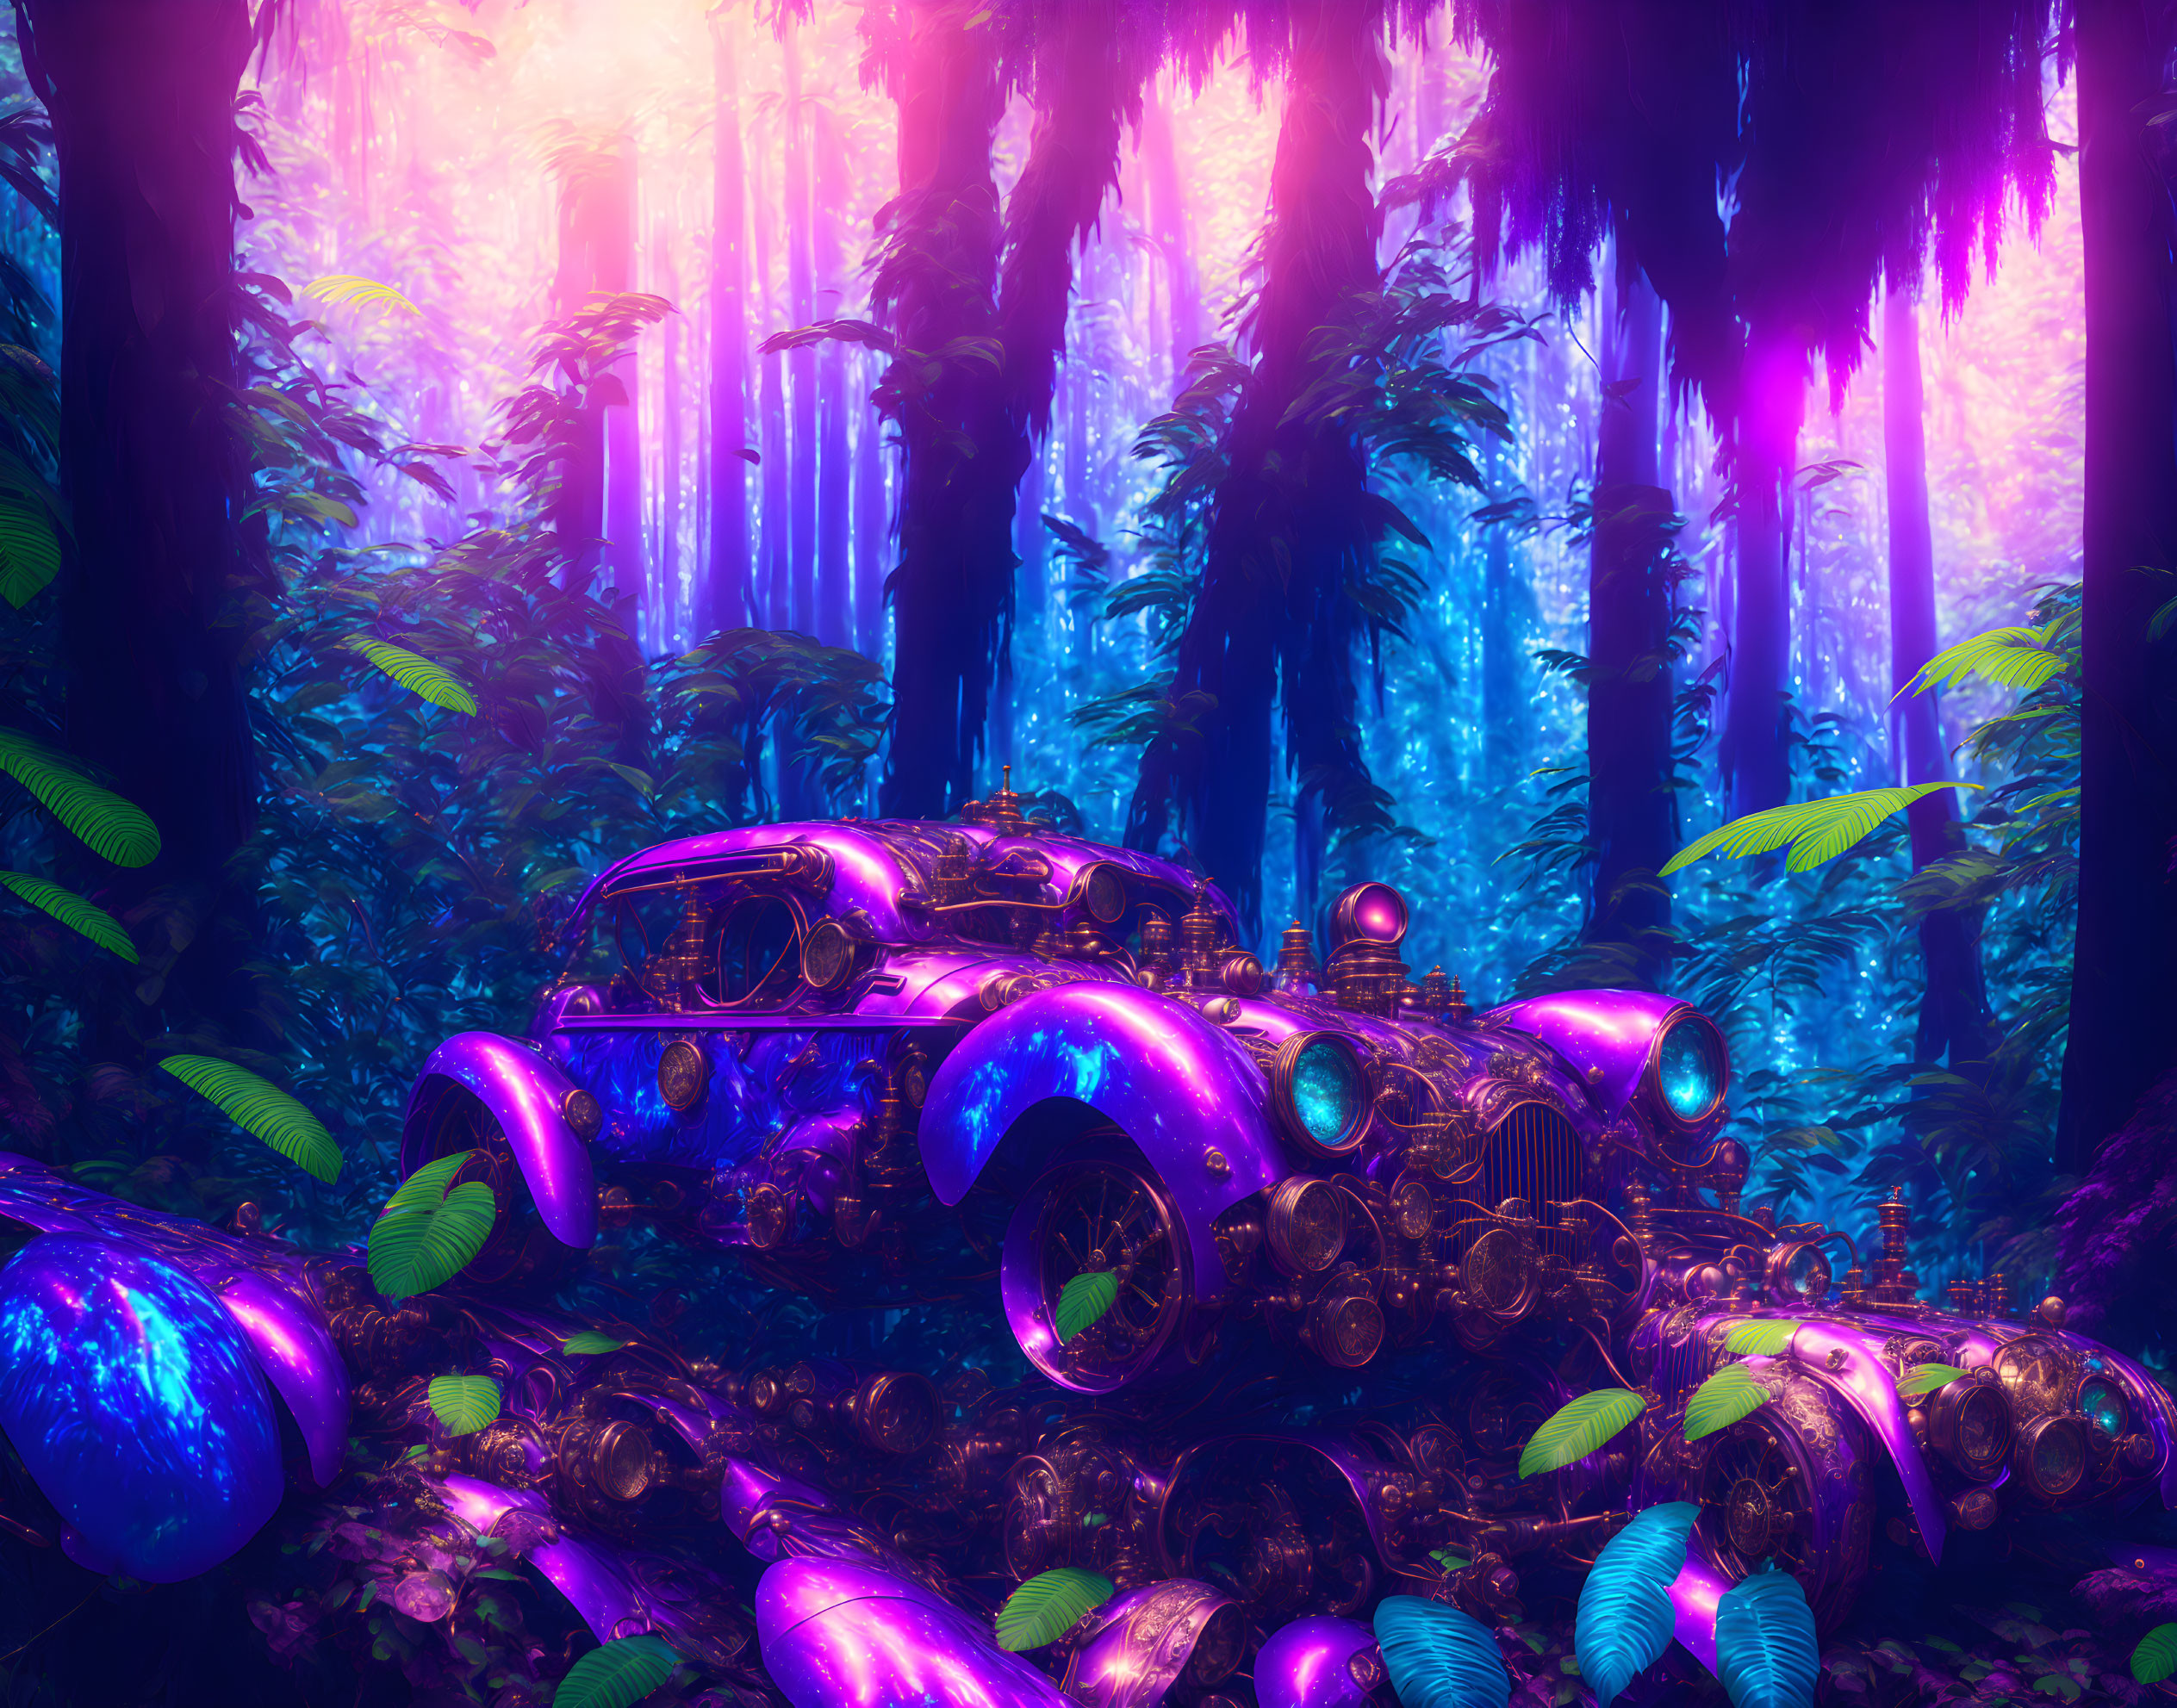 Neon-lit fantasy forest with futuristic car and vibrant colors